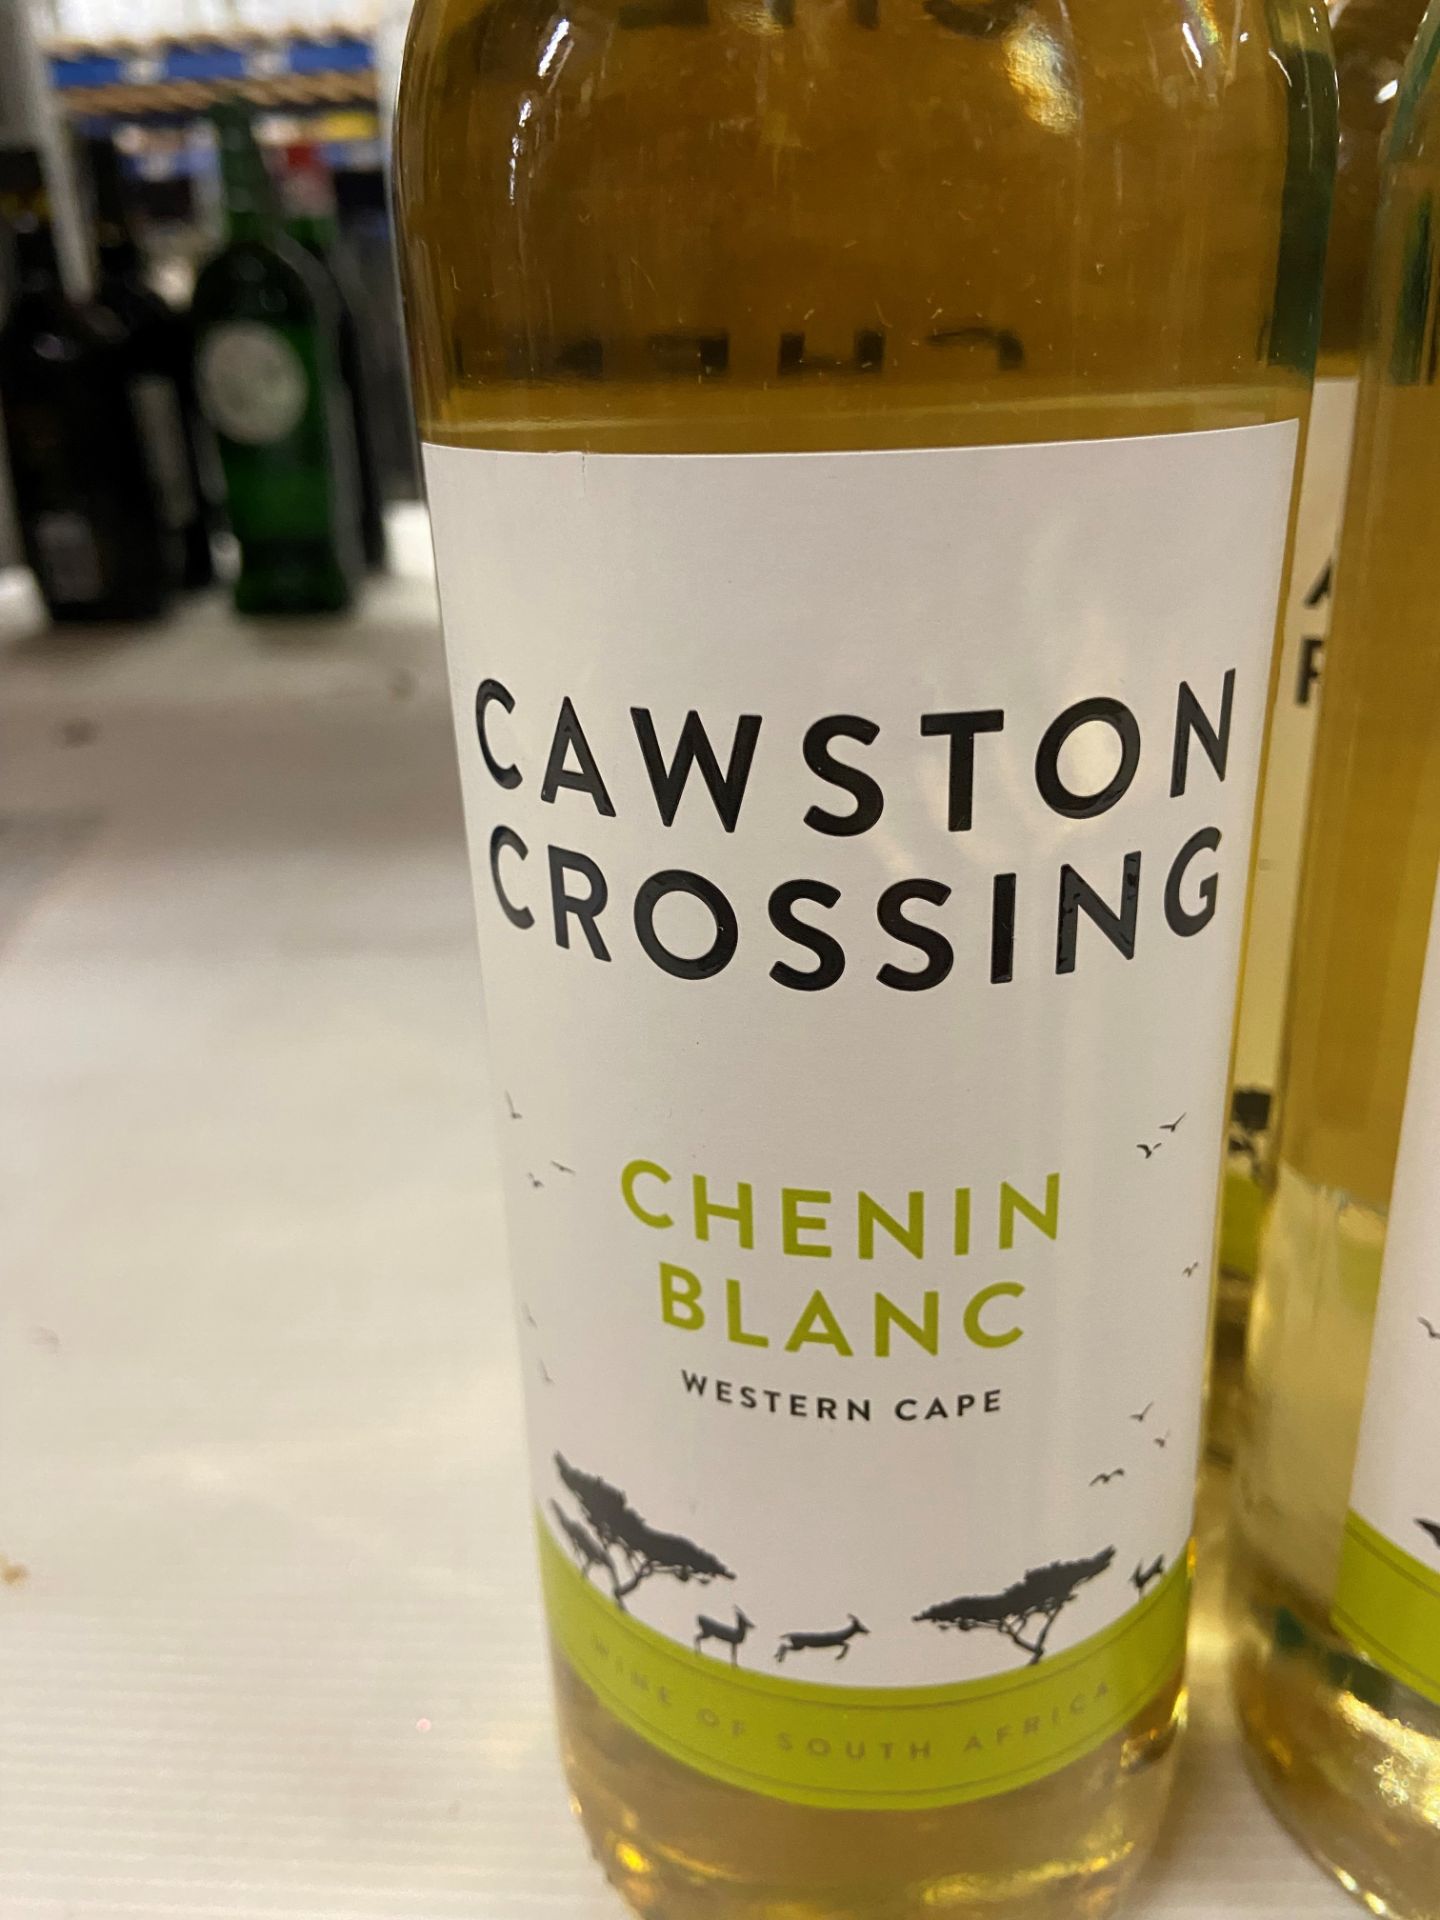 6 x 75cl bottles of Cawston Crossing Chenin Blanc Wesrn Cape wine - Image 2 of 2